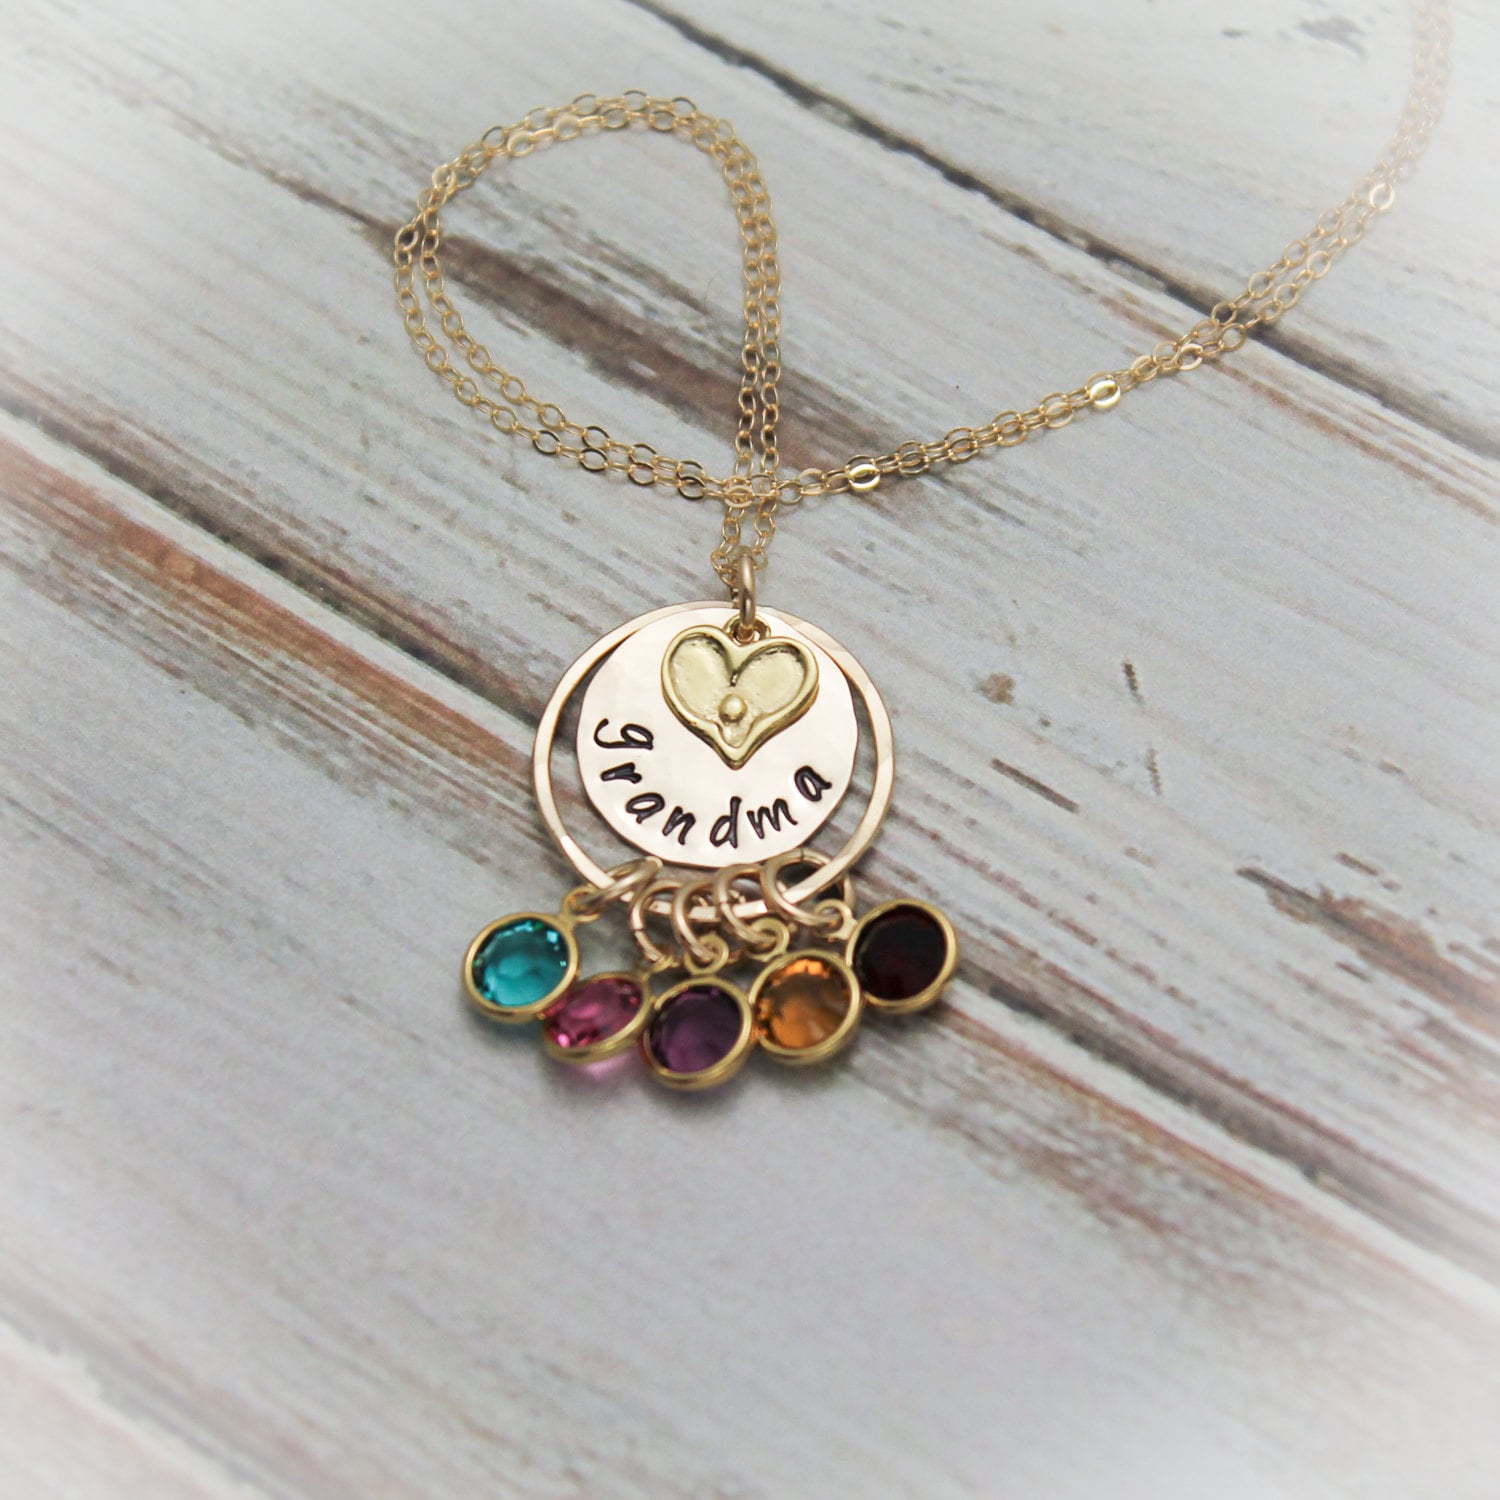 Grandma Necklace with Birthstones Personalize with Grandchildren Hand Stamped Jewelry 14K Gold Filled